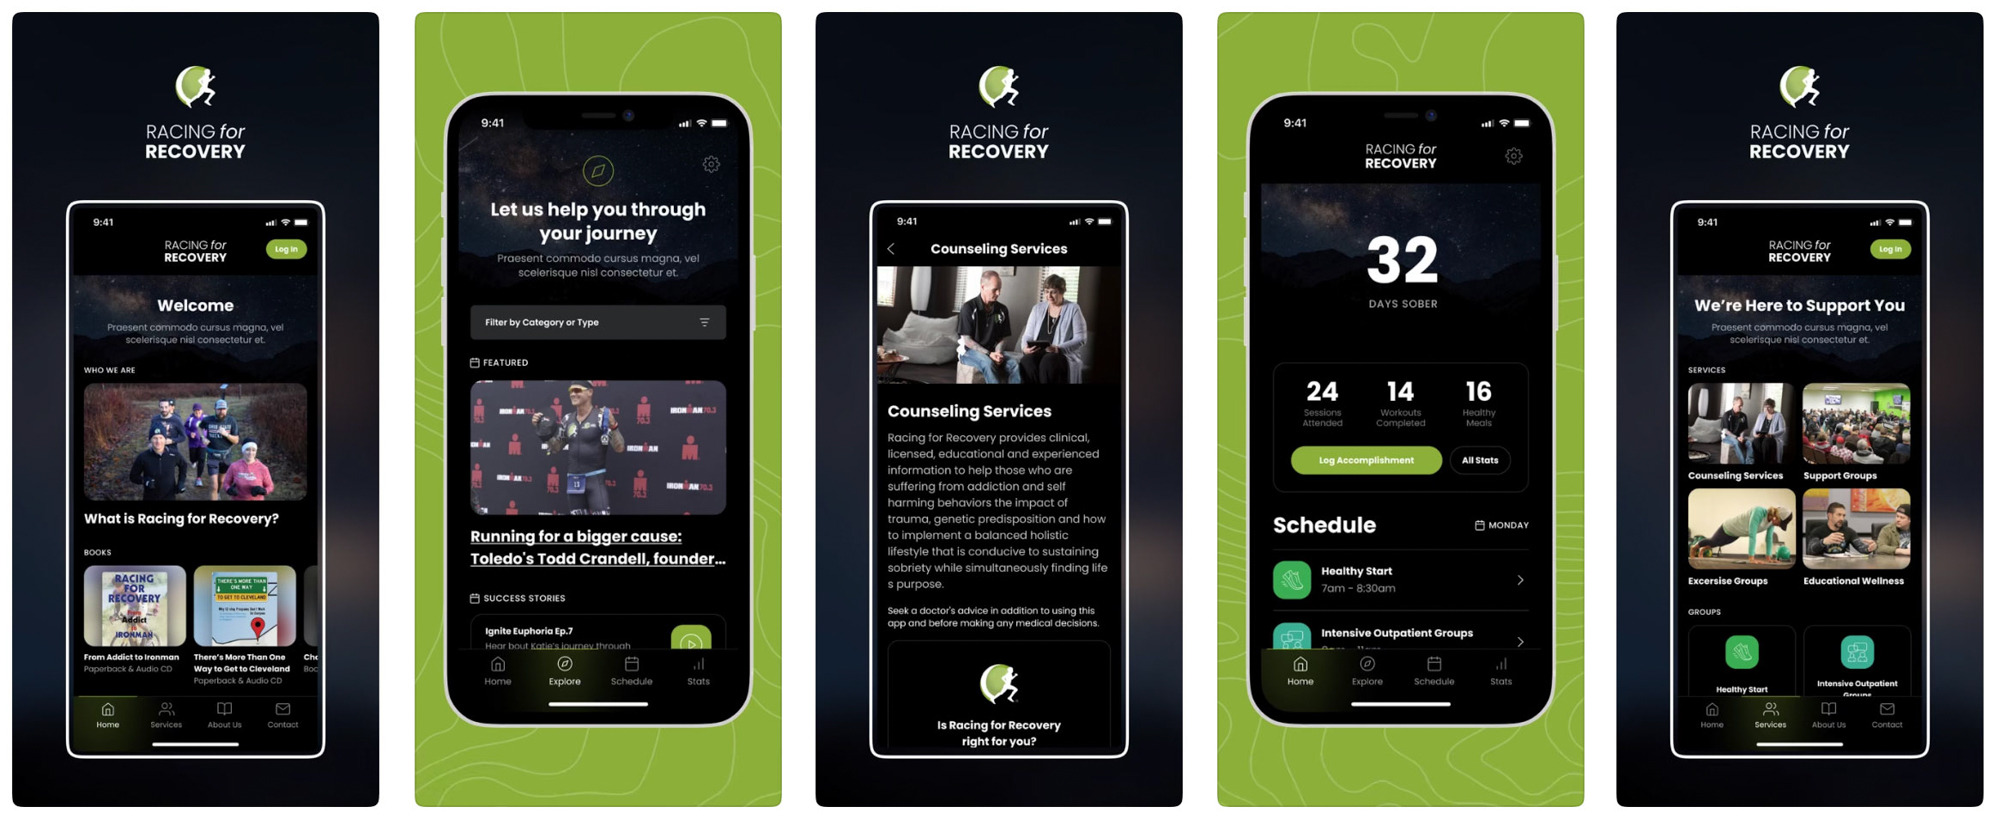 Racing for Recovery Mobile App Snapshot